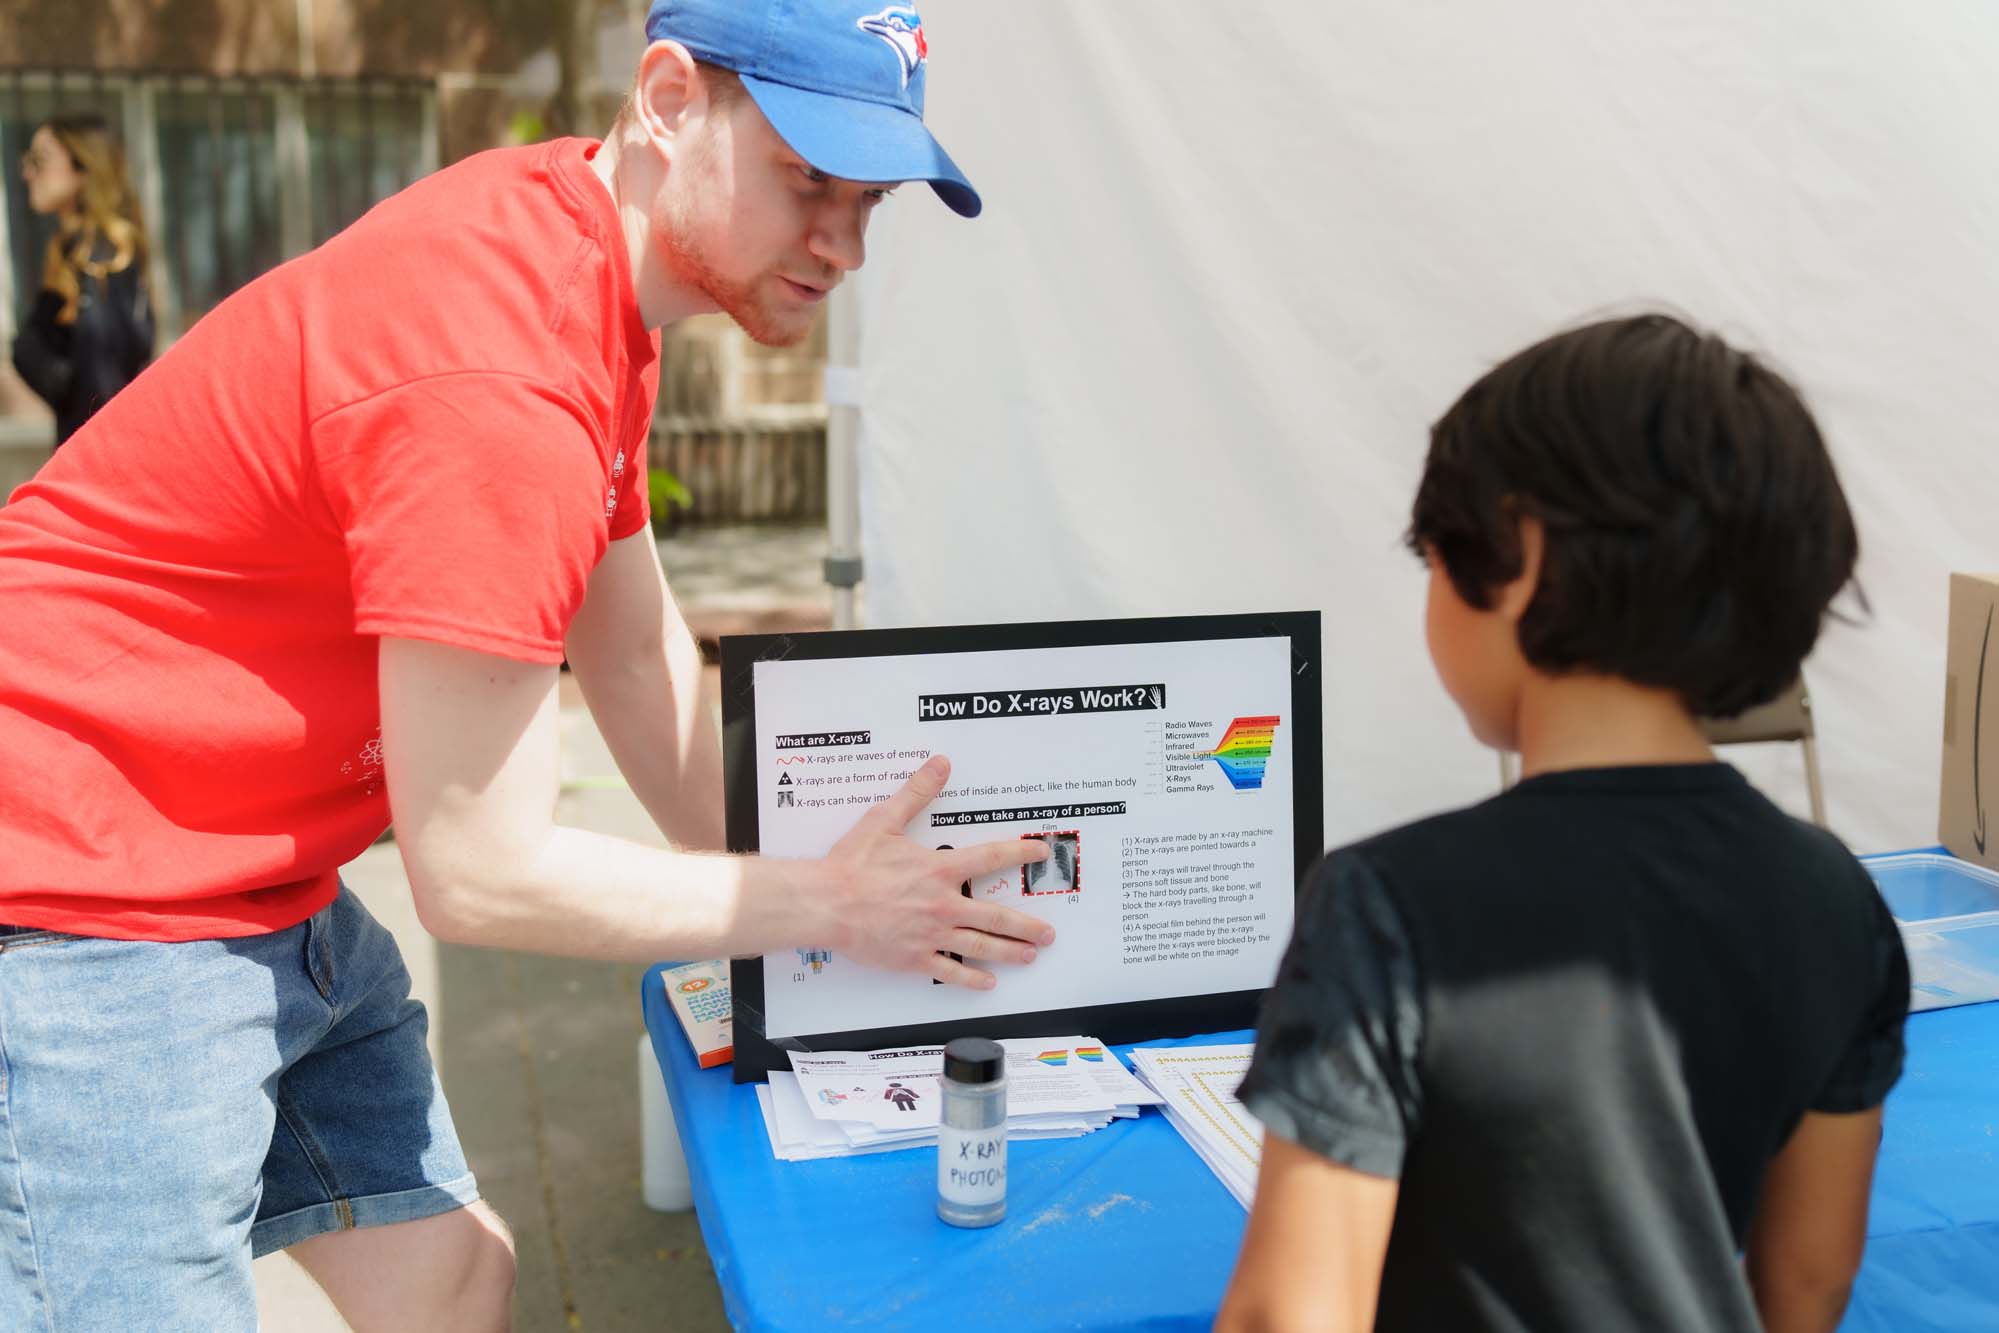 A volunteer pointing at a presentation board about "How Do X-rays Work?" to a child.